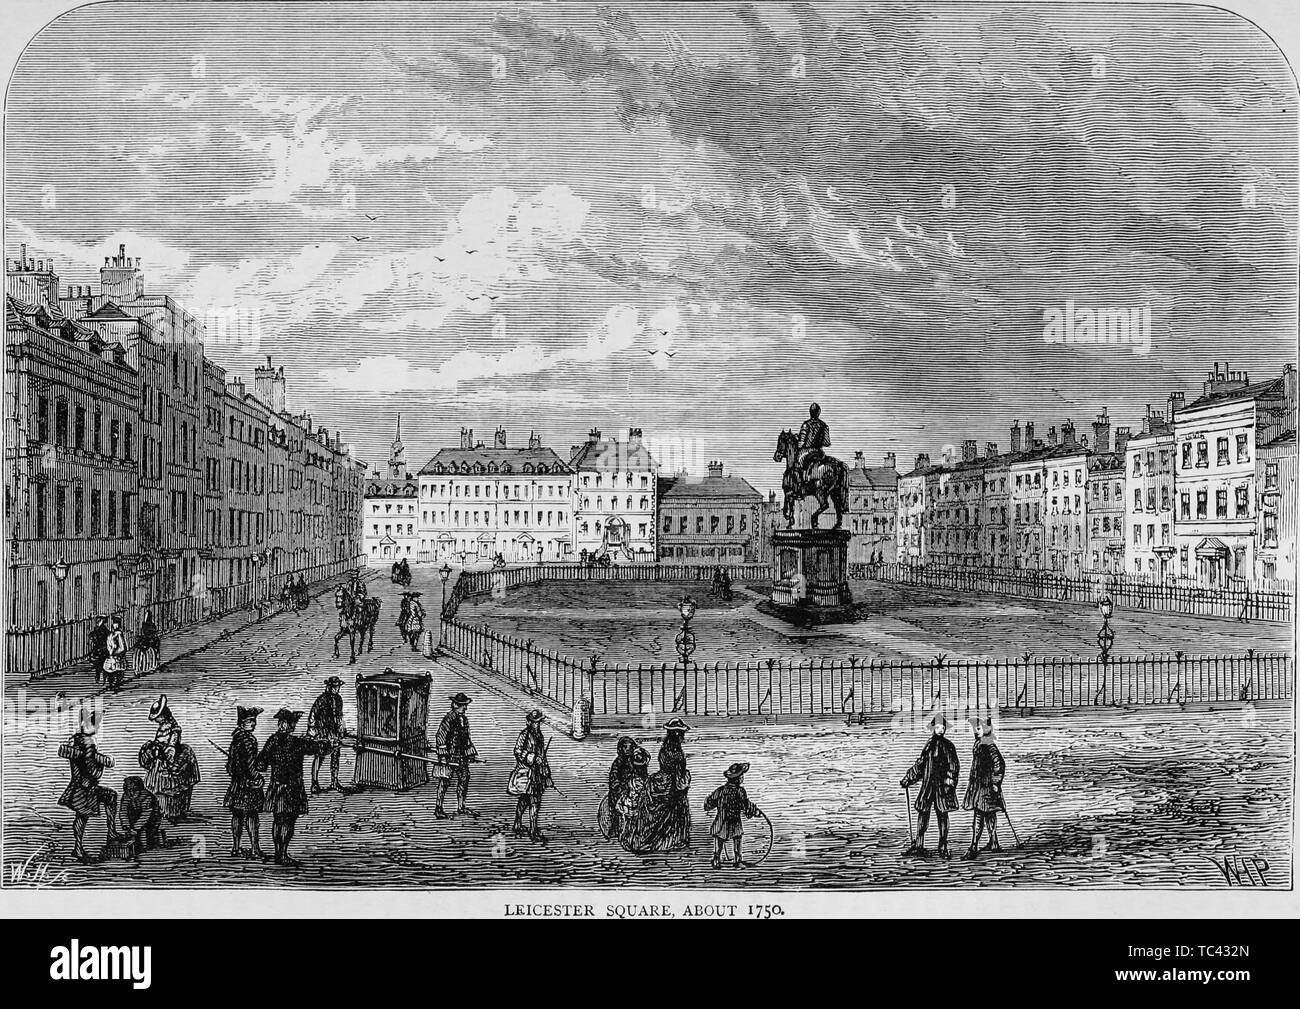 Engraving of Leicester Square in London, England, from the book 'Old and new London: a narrative of its history, its people, and its places' by Thornbury Walter, 1873. Courtesy Internet Archive. () Stock Photo